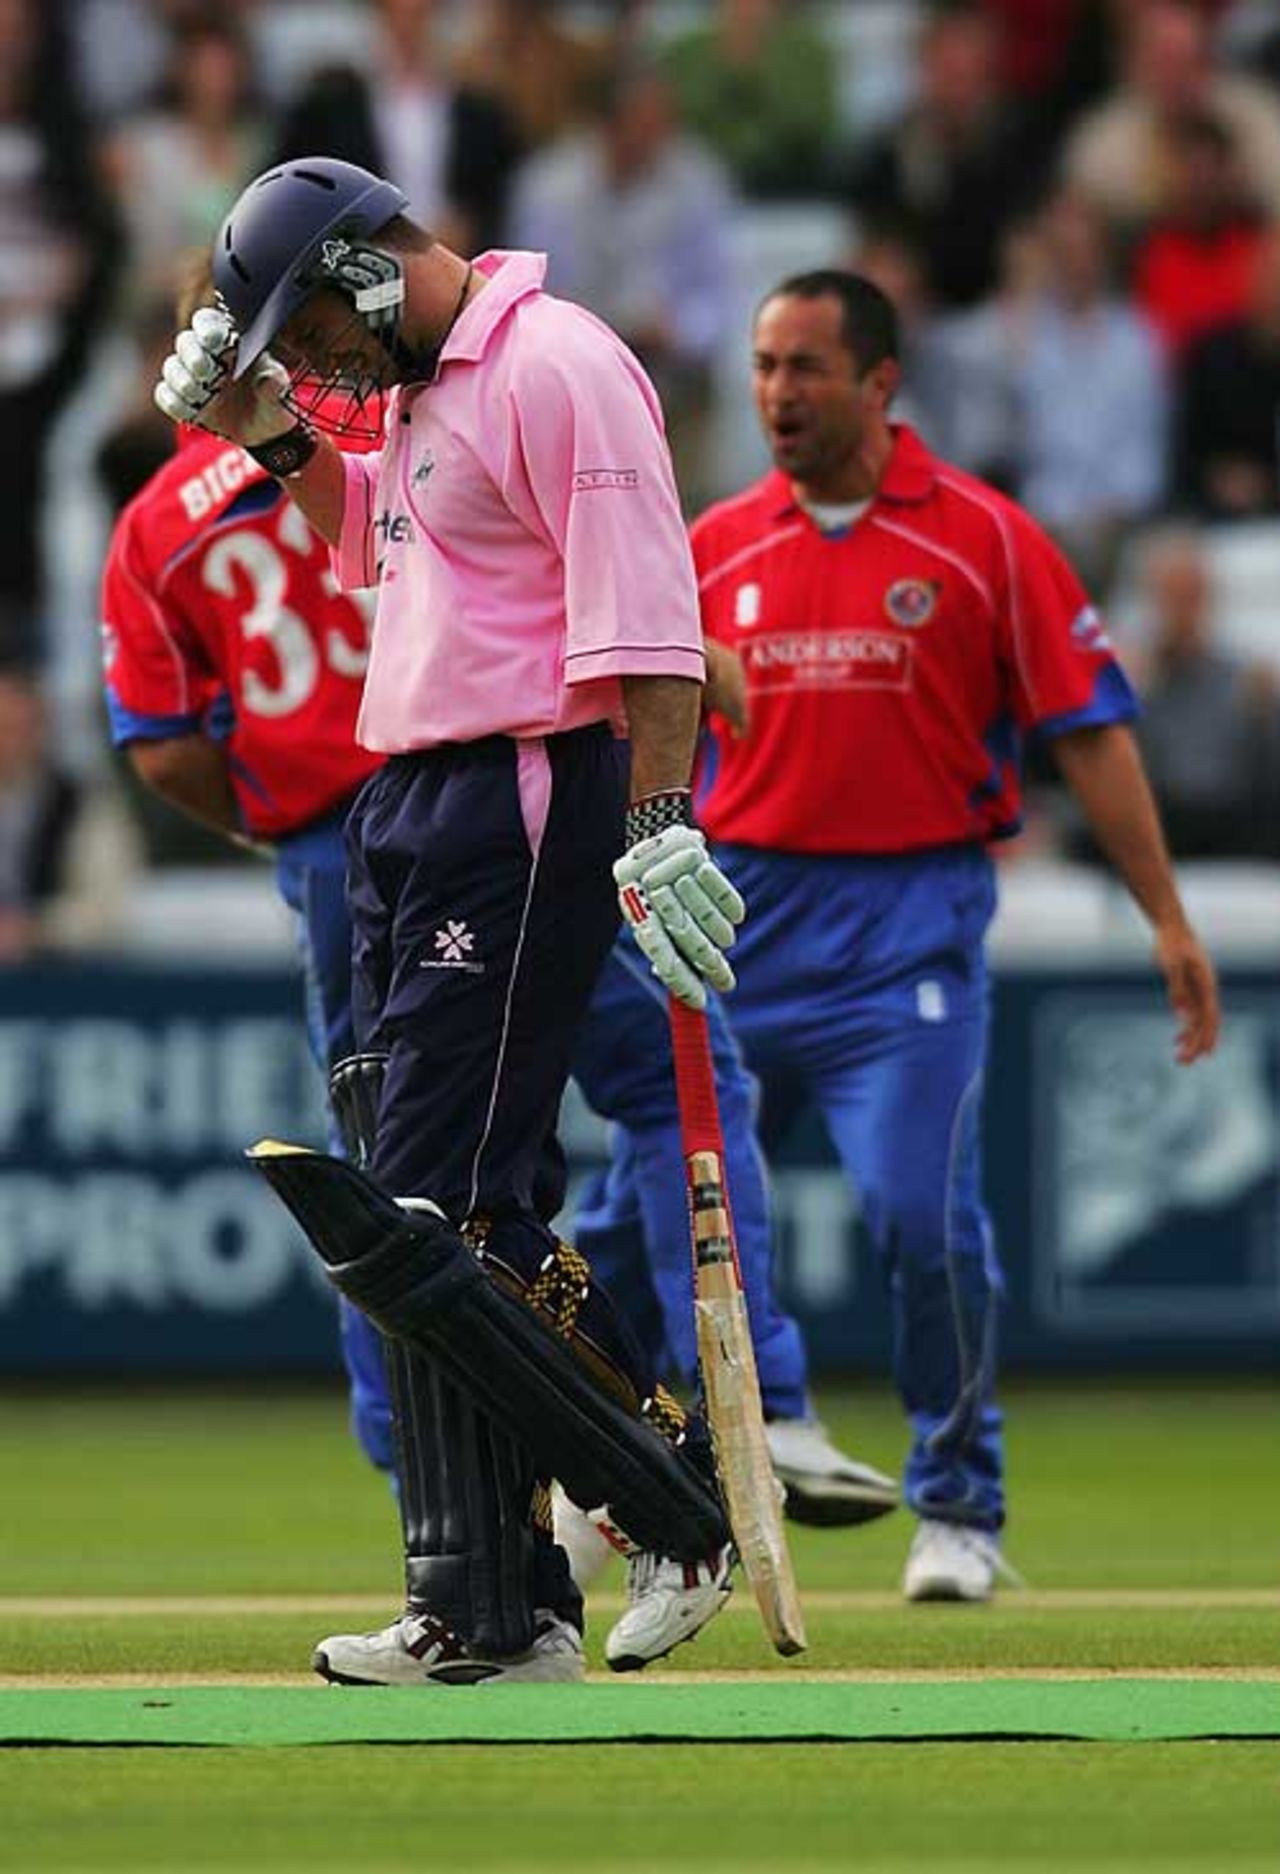 Another failure for Andrew Strauss, as he falls for a second-ball duck against Essex at Lord's, July 6, 2007